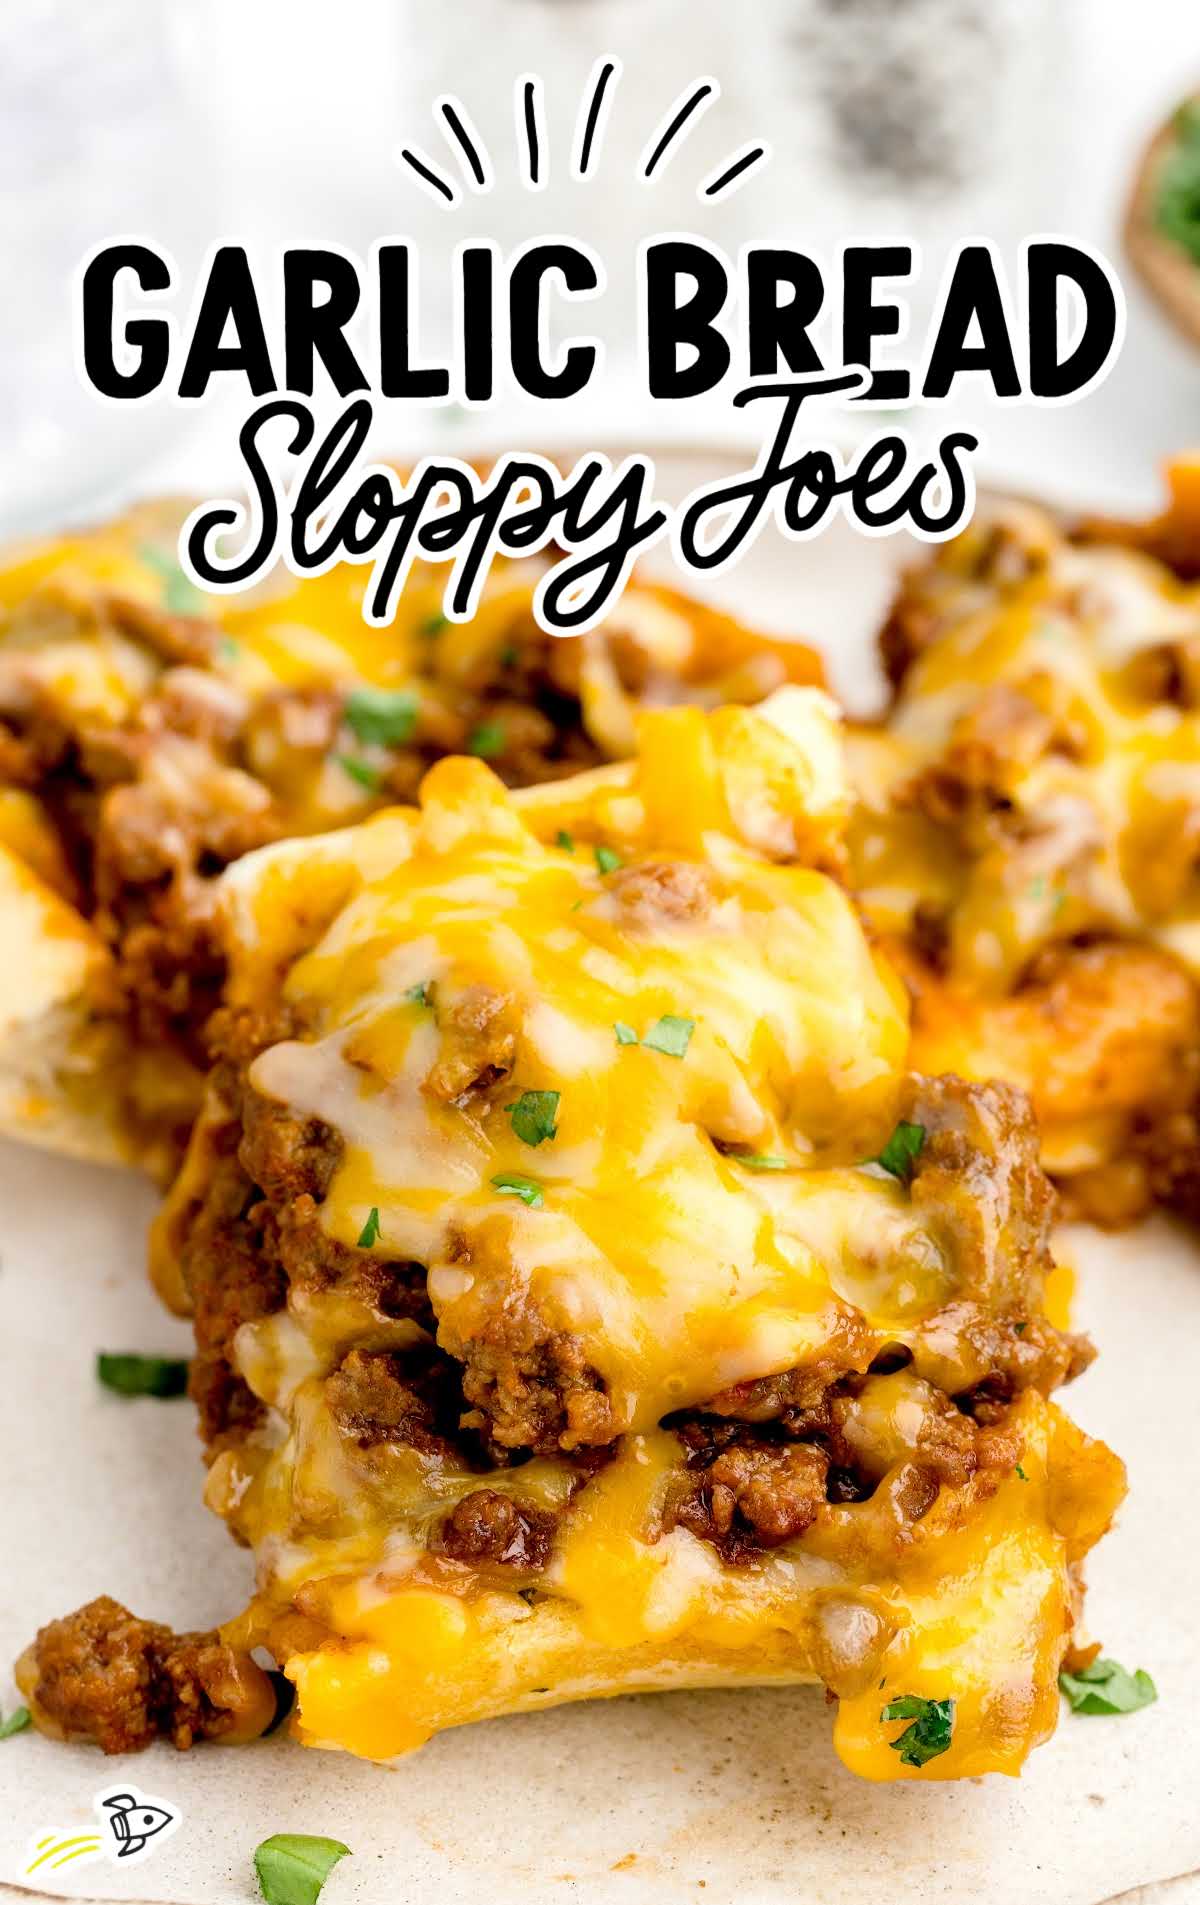 garlic bread sloppy joes served on a plate